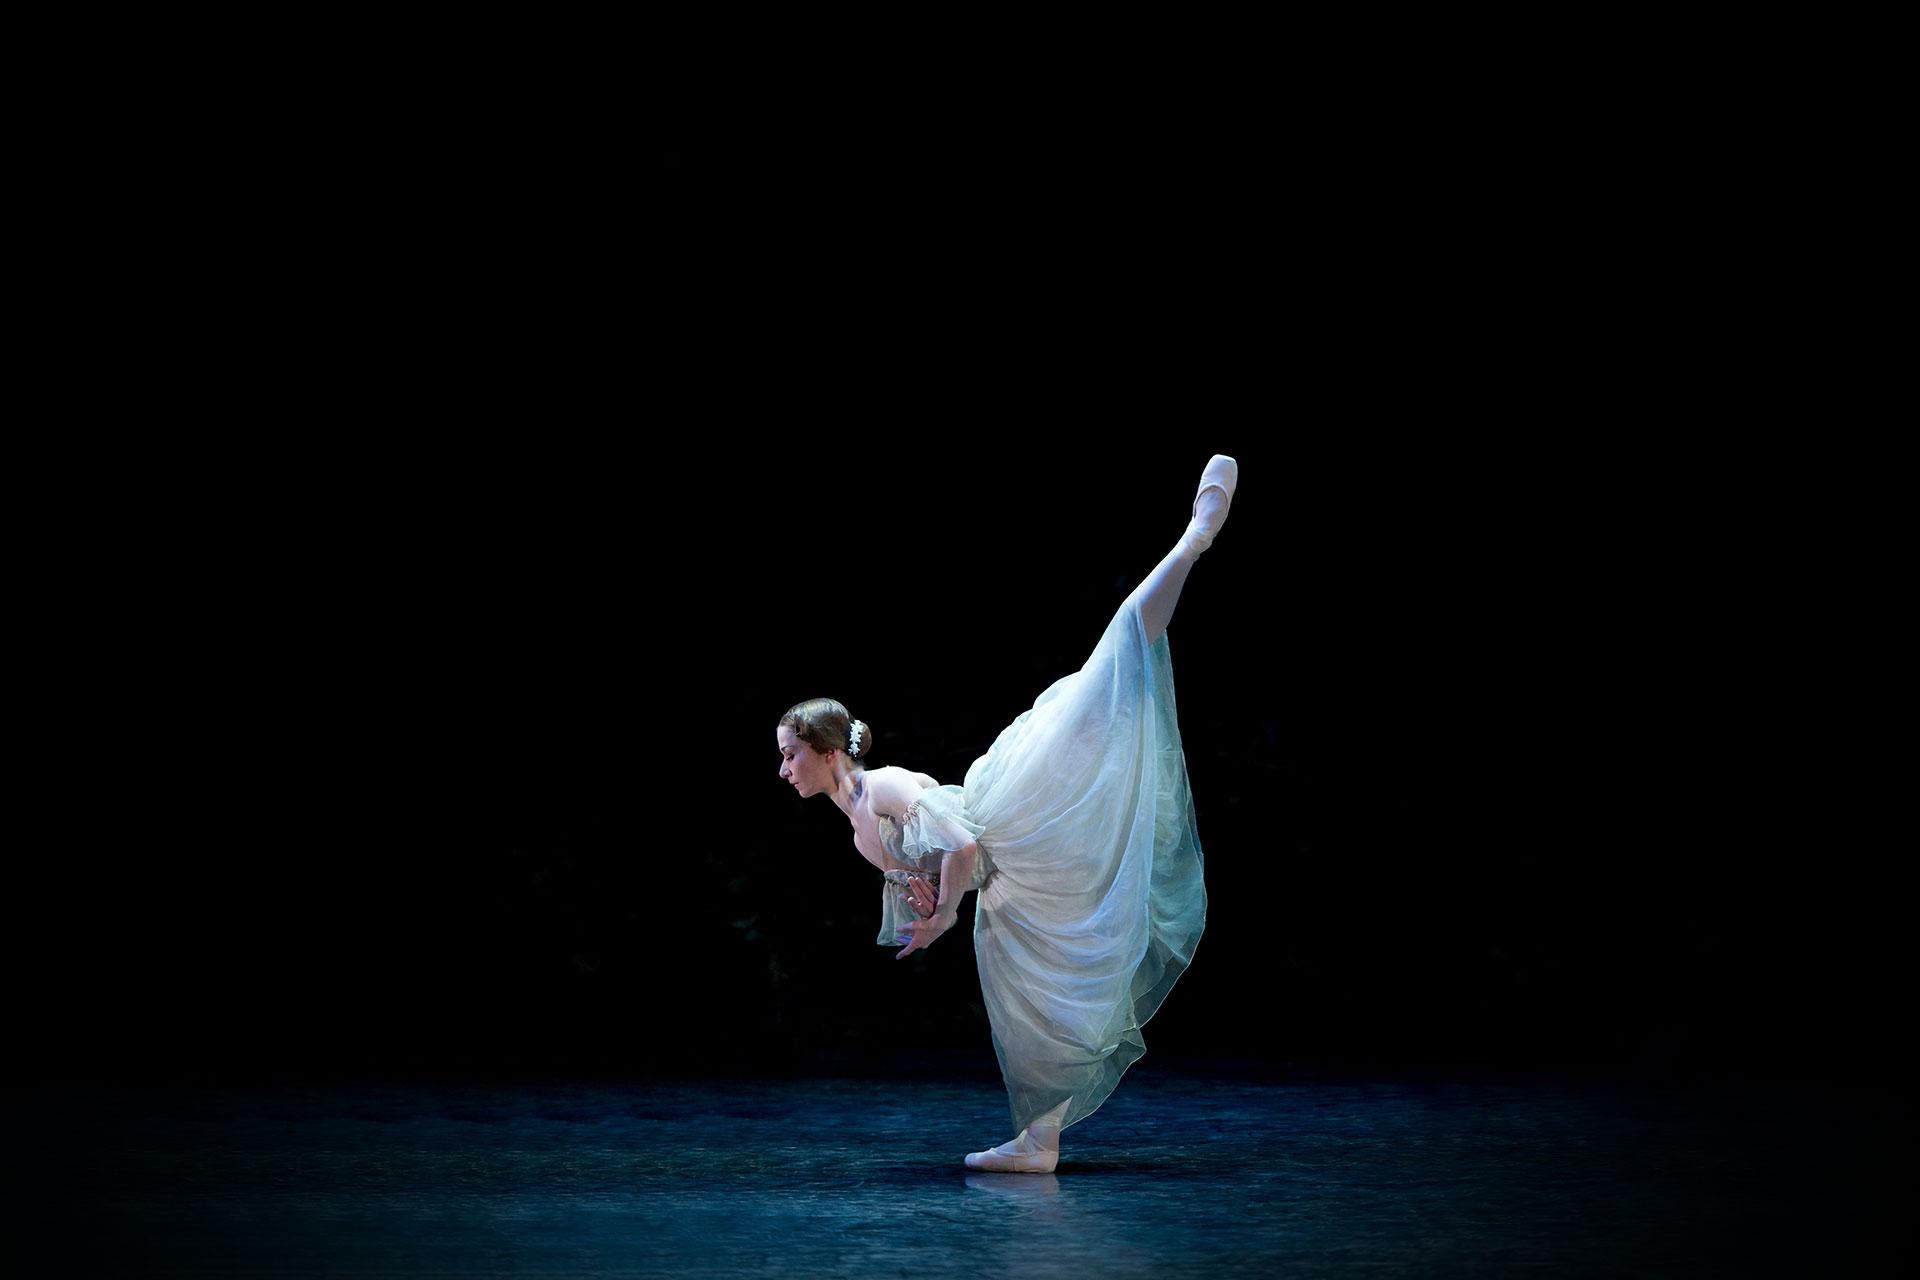 A woman in white is doing ballet - Ballet